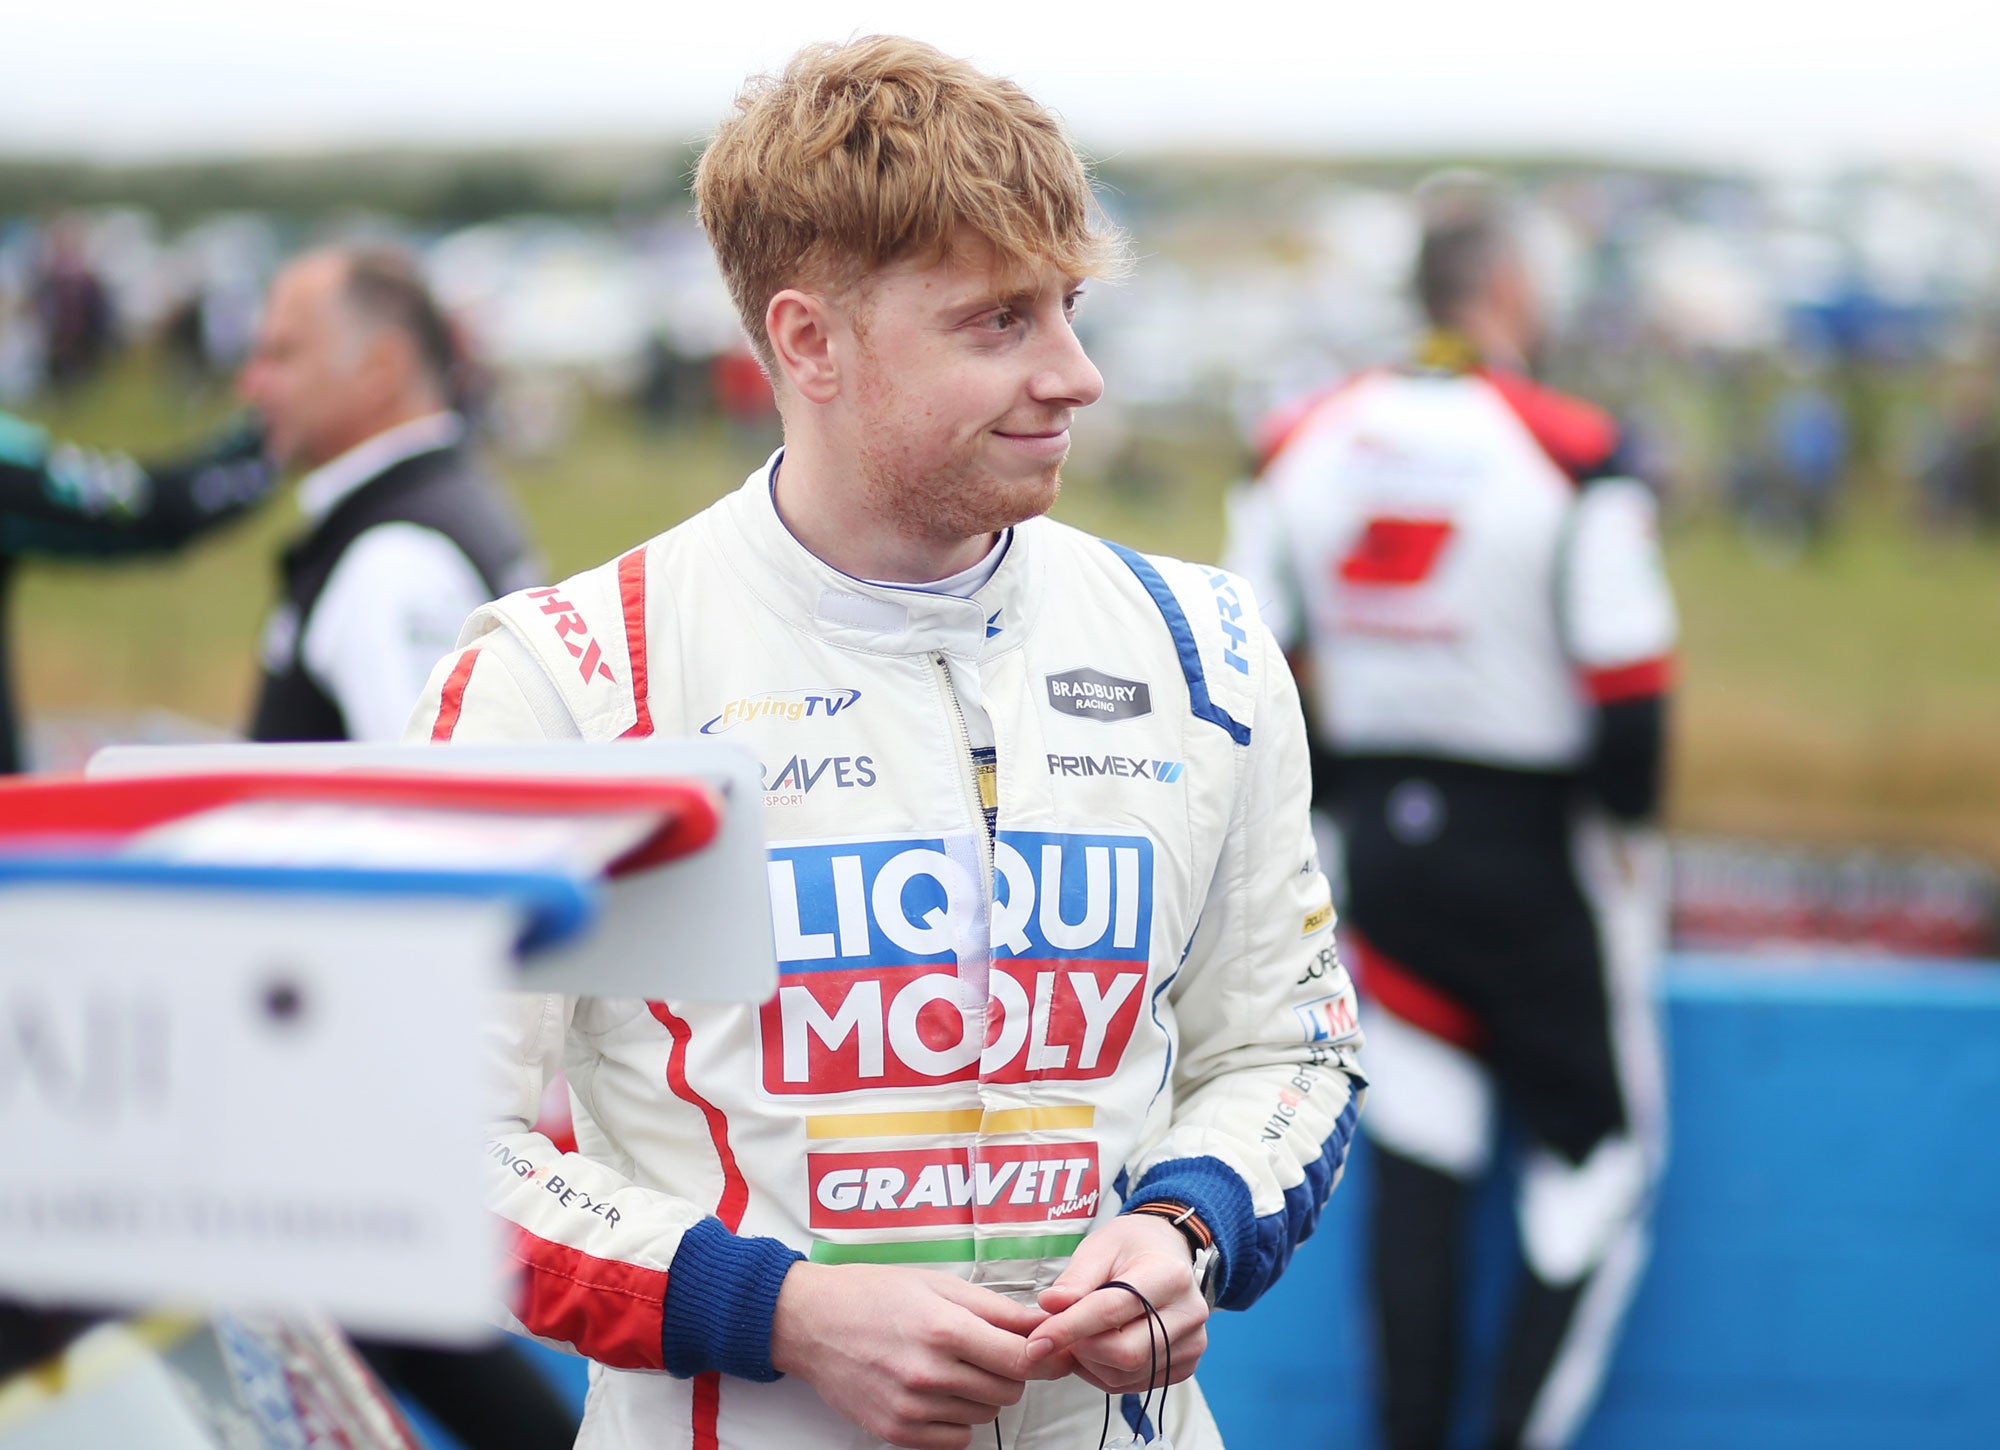 Bradley Gravett son of BTCC British Touring Car Champion Robb Gravett in the MINI Challenge JCW Series at Knockhill in 2022 Smiling in Assembly Area Graves Motorsport Cooper Racing Driver LIQUI MOLY LM Performance Thinking it Better